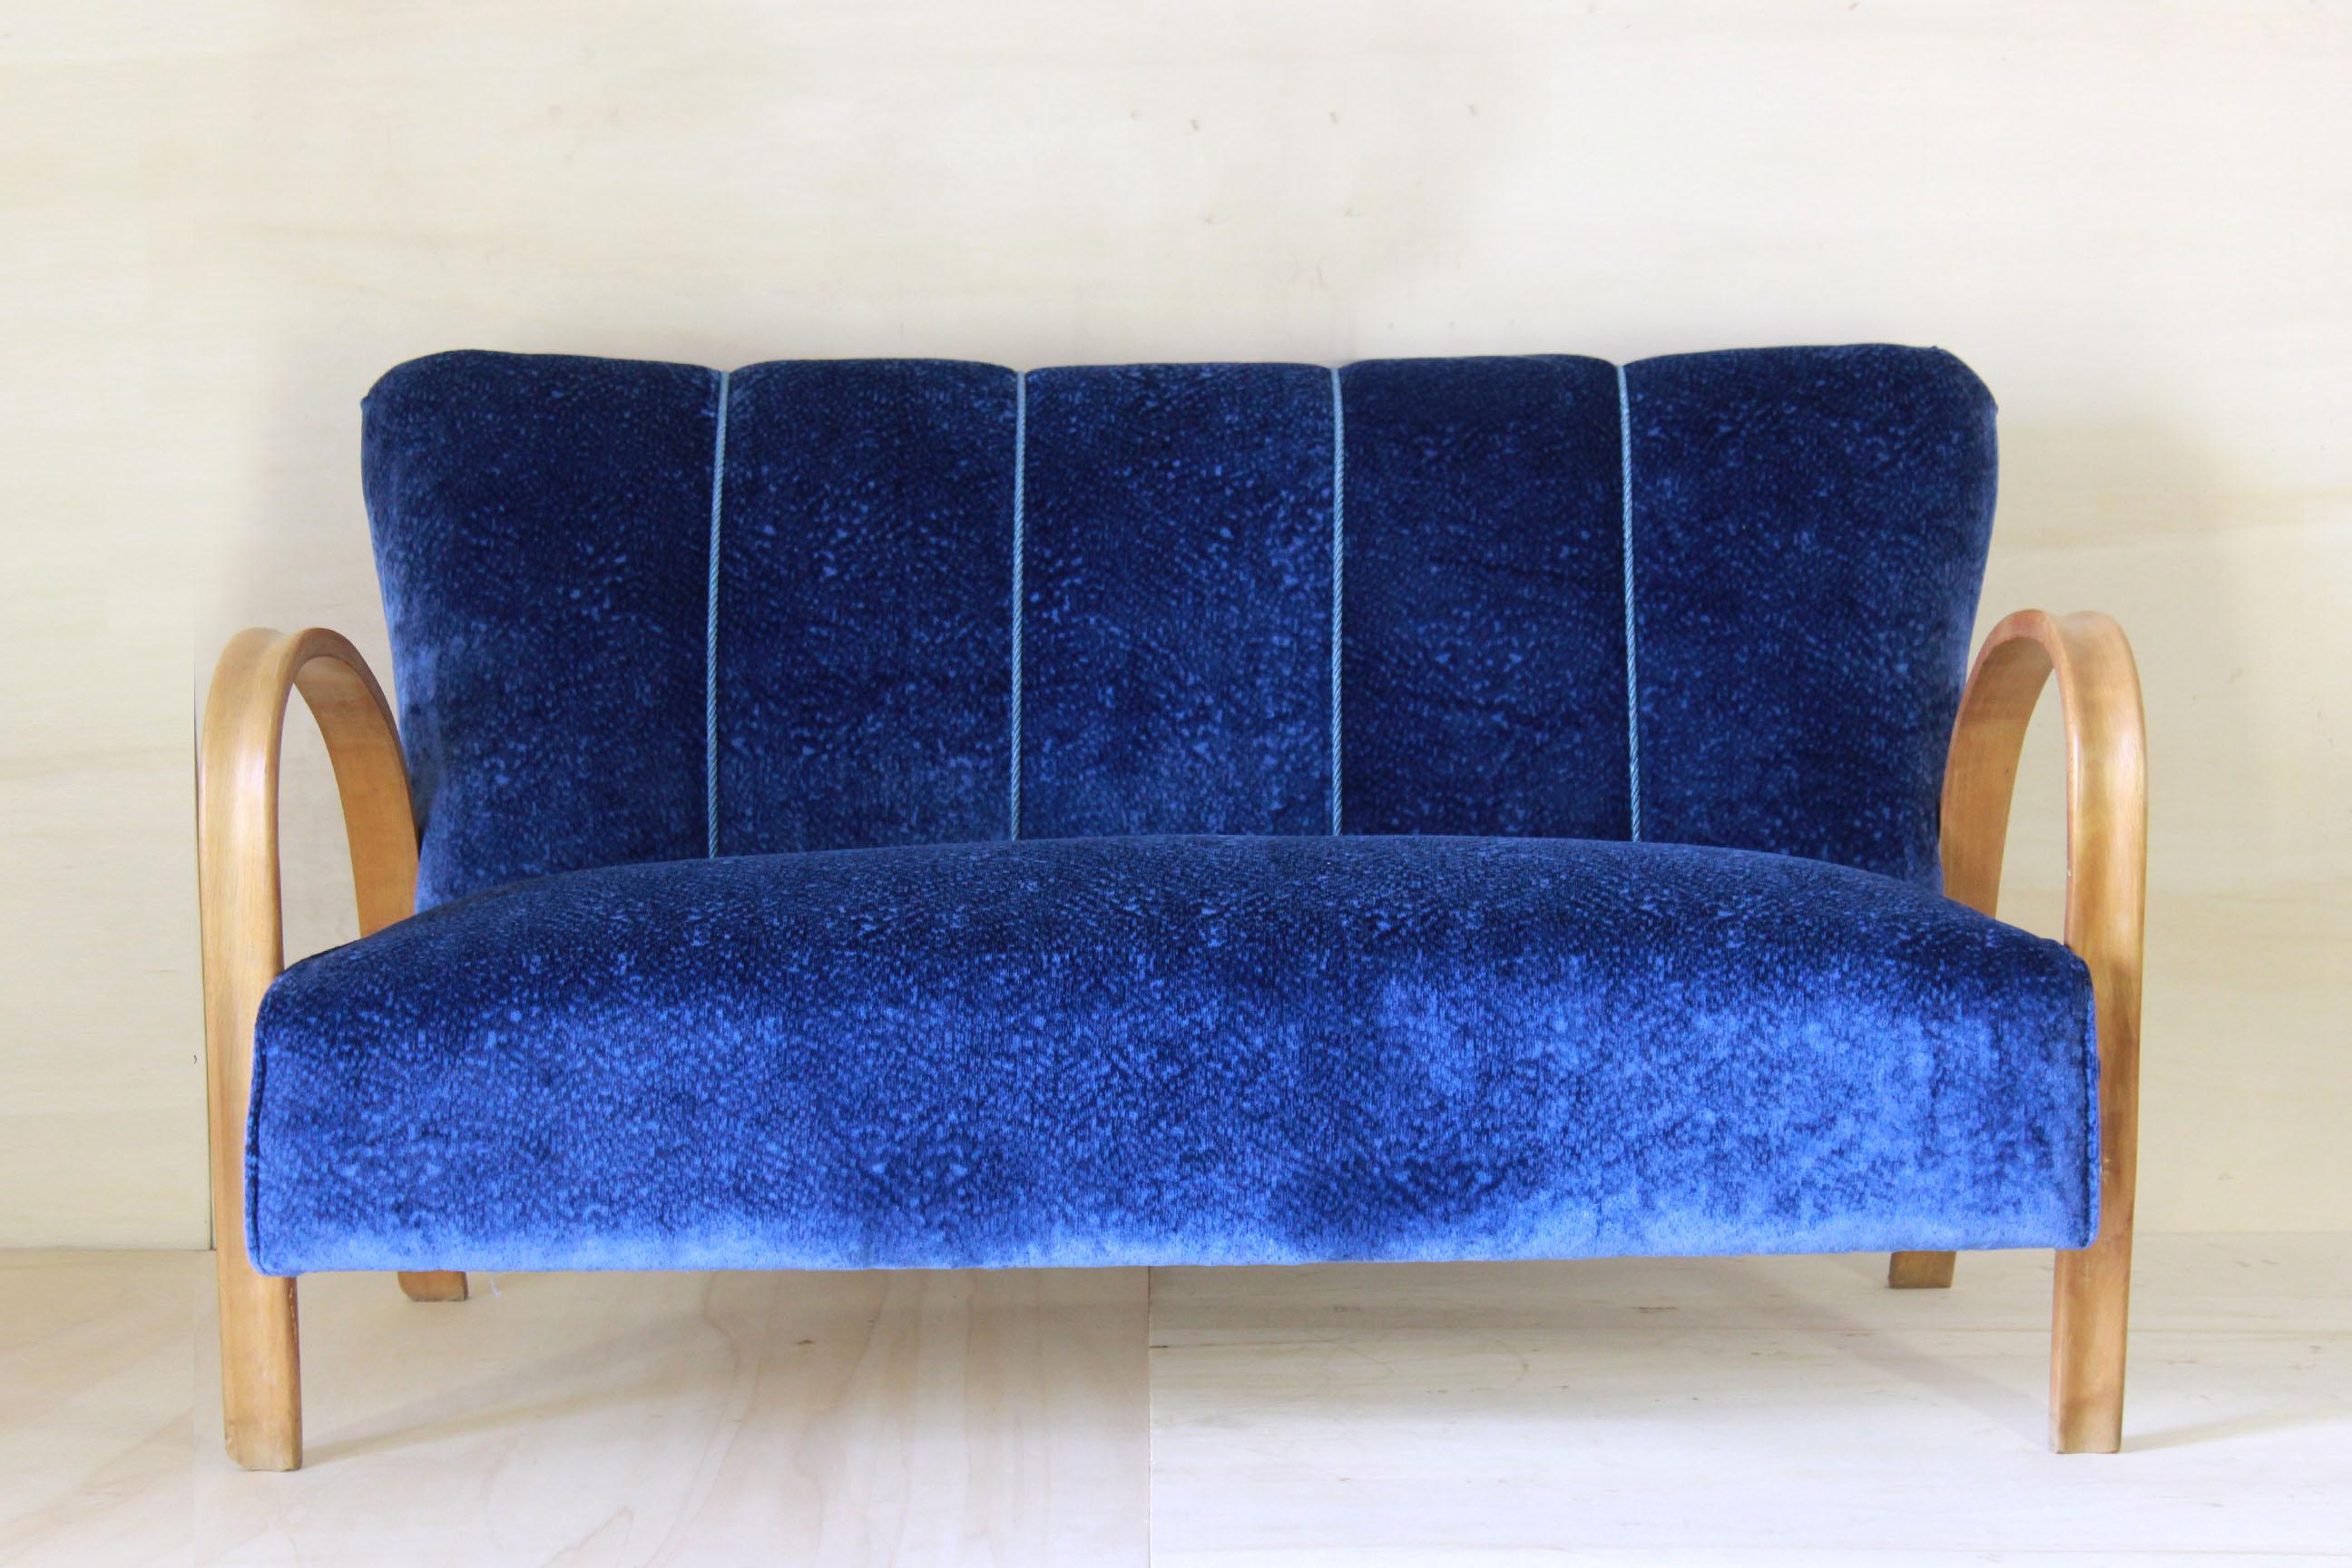 A 1940s Art Deco sofa. Curved solid wood structure and blue velvet cover. In excellent conditions.

NOTE: contact us for info and requests.  If possibile, we could take part of shipping costs quote.